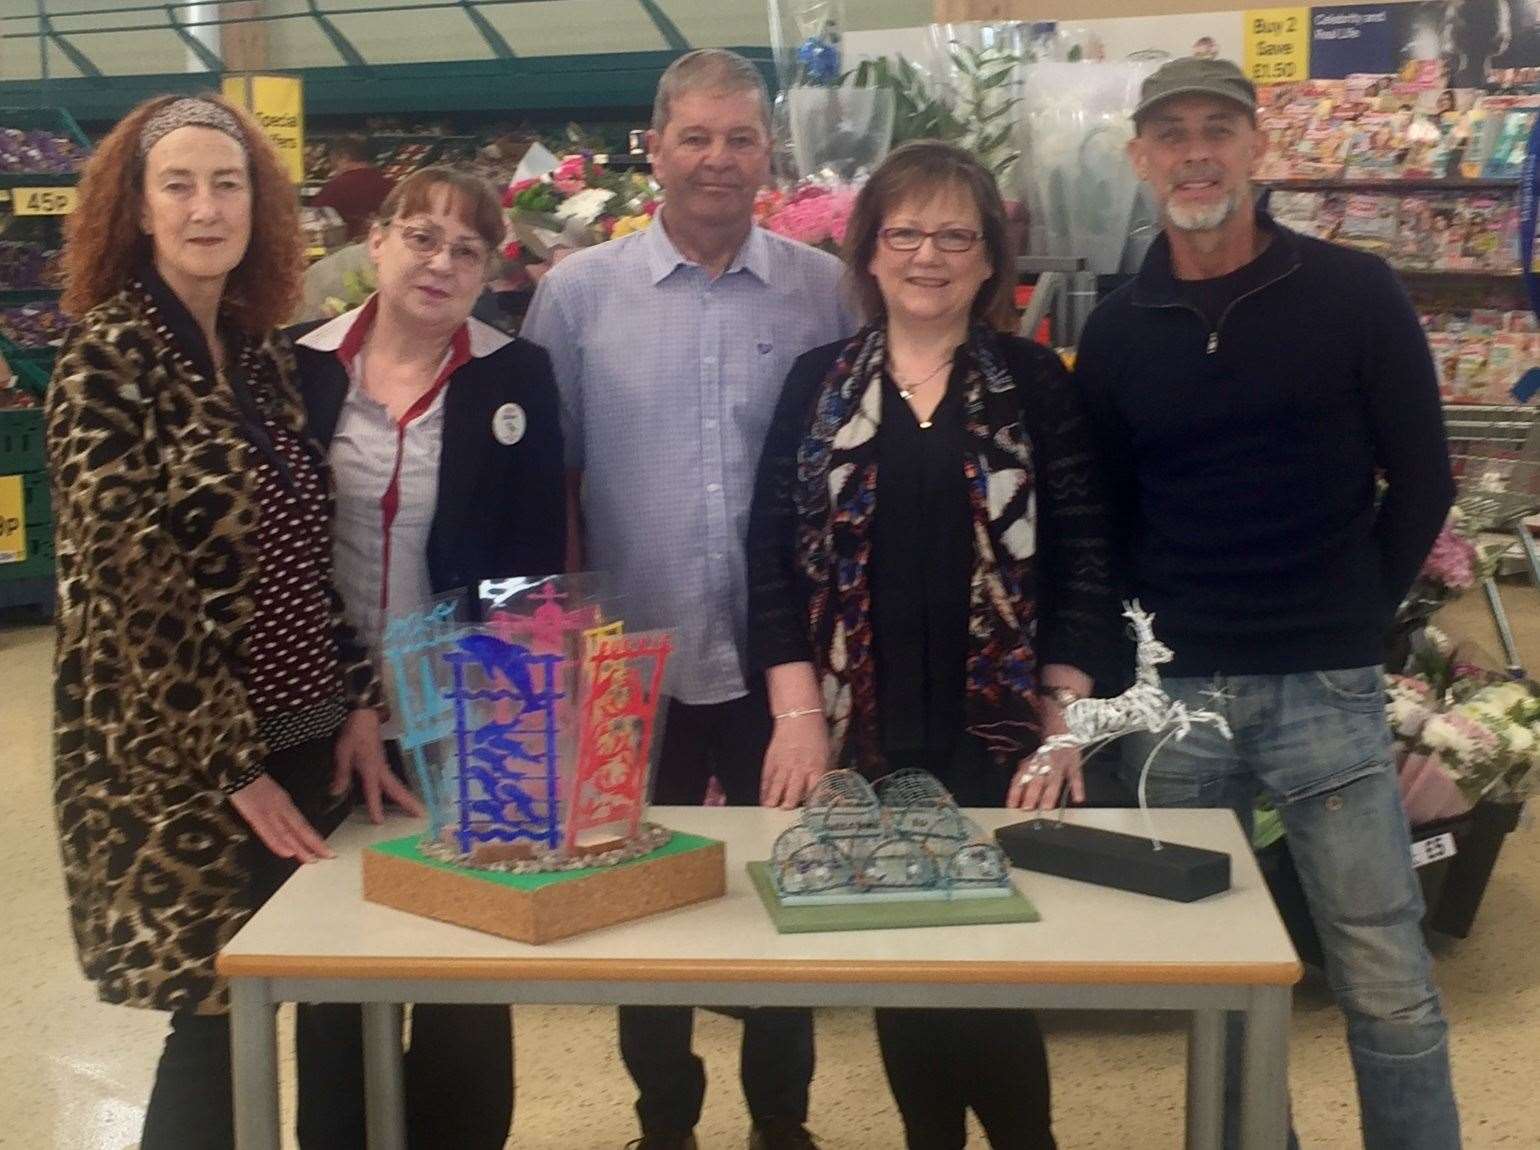 Artists Maggie Clyde (left) and Carn Standing (right) show off their designs to Councillors Gordon Cowie and Sonya warren (second right), joined by Tesco checkout manager Gillian Bower. Missing from the photo is artist Emma Crawford. Photo: SPP